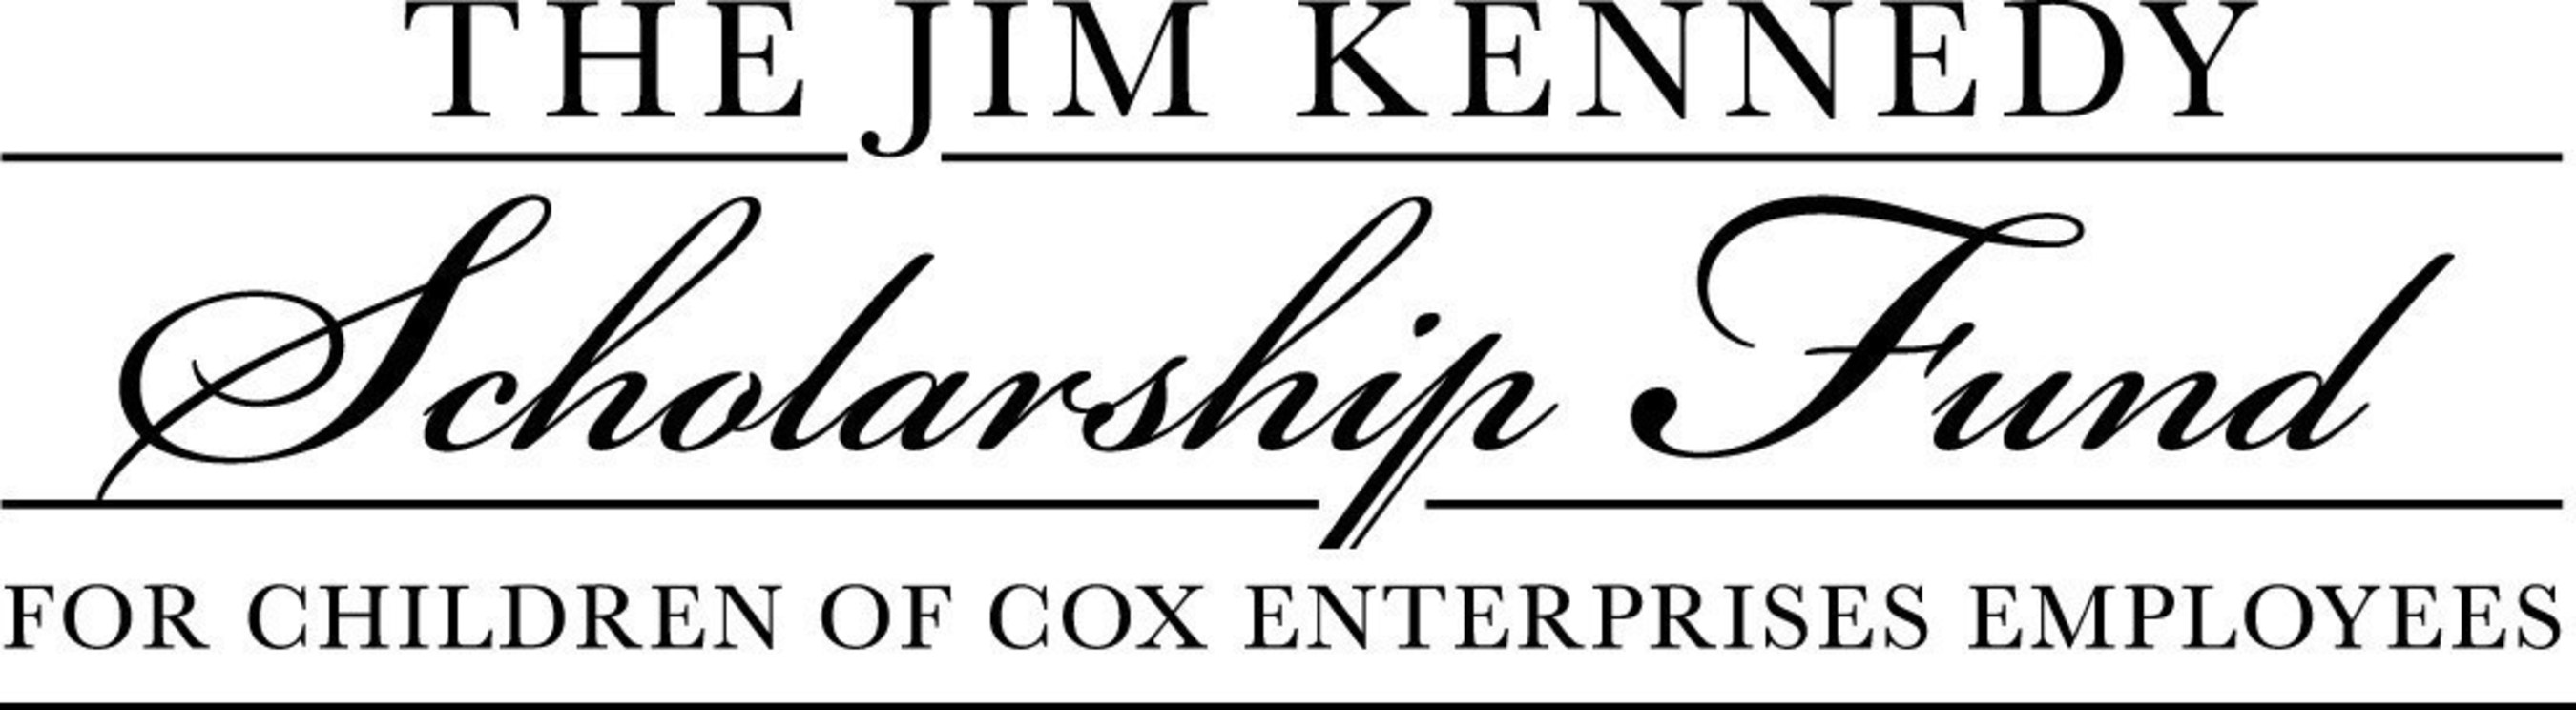 The Jim Kennedy Scholarship Fund supports children of Cox employees.